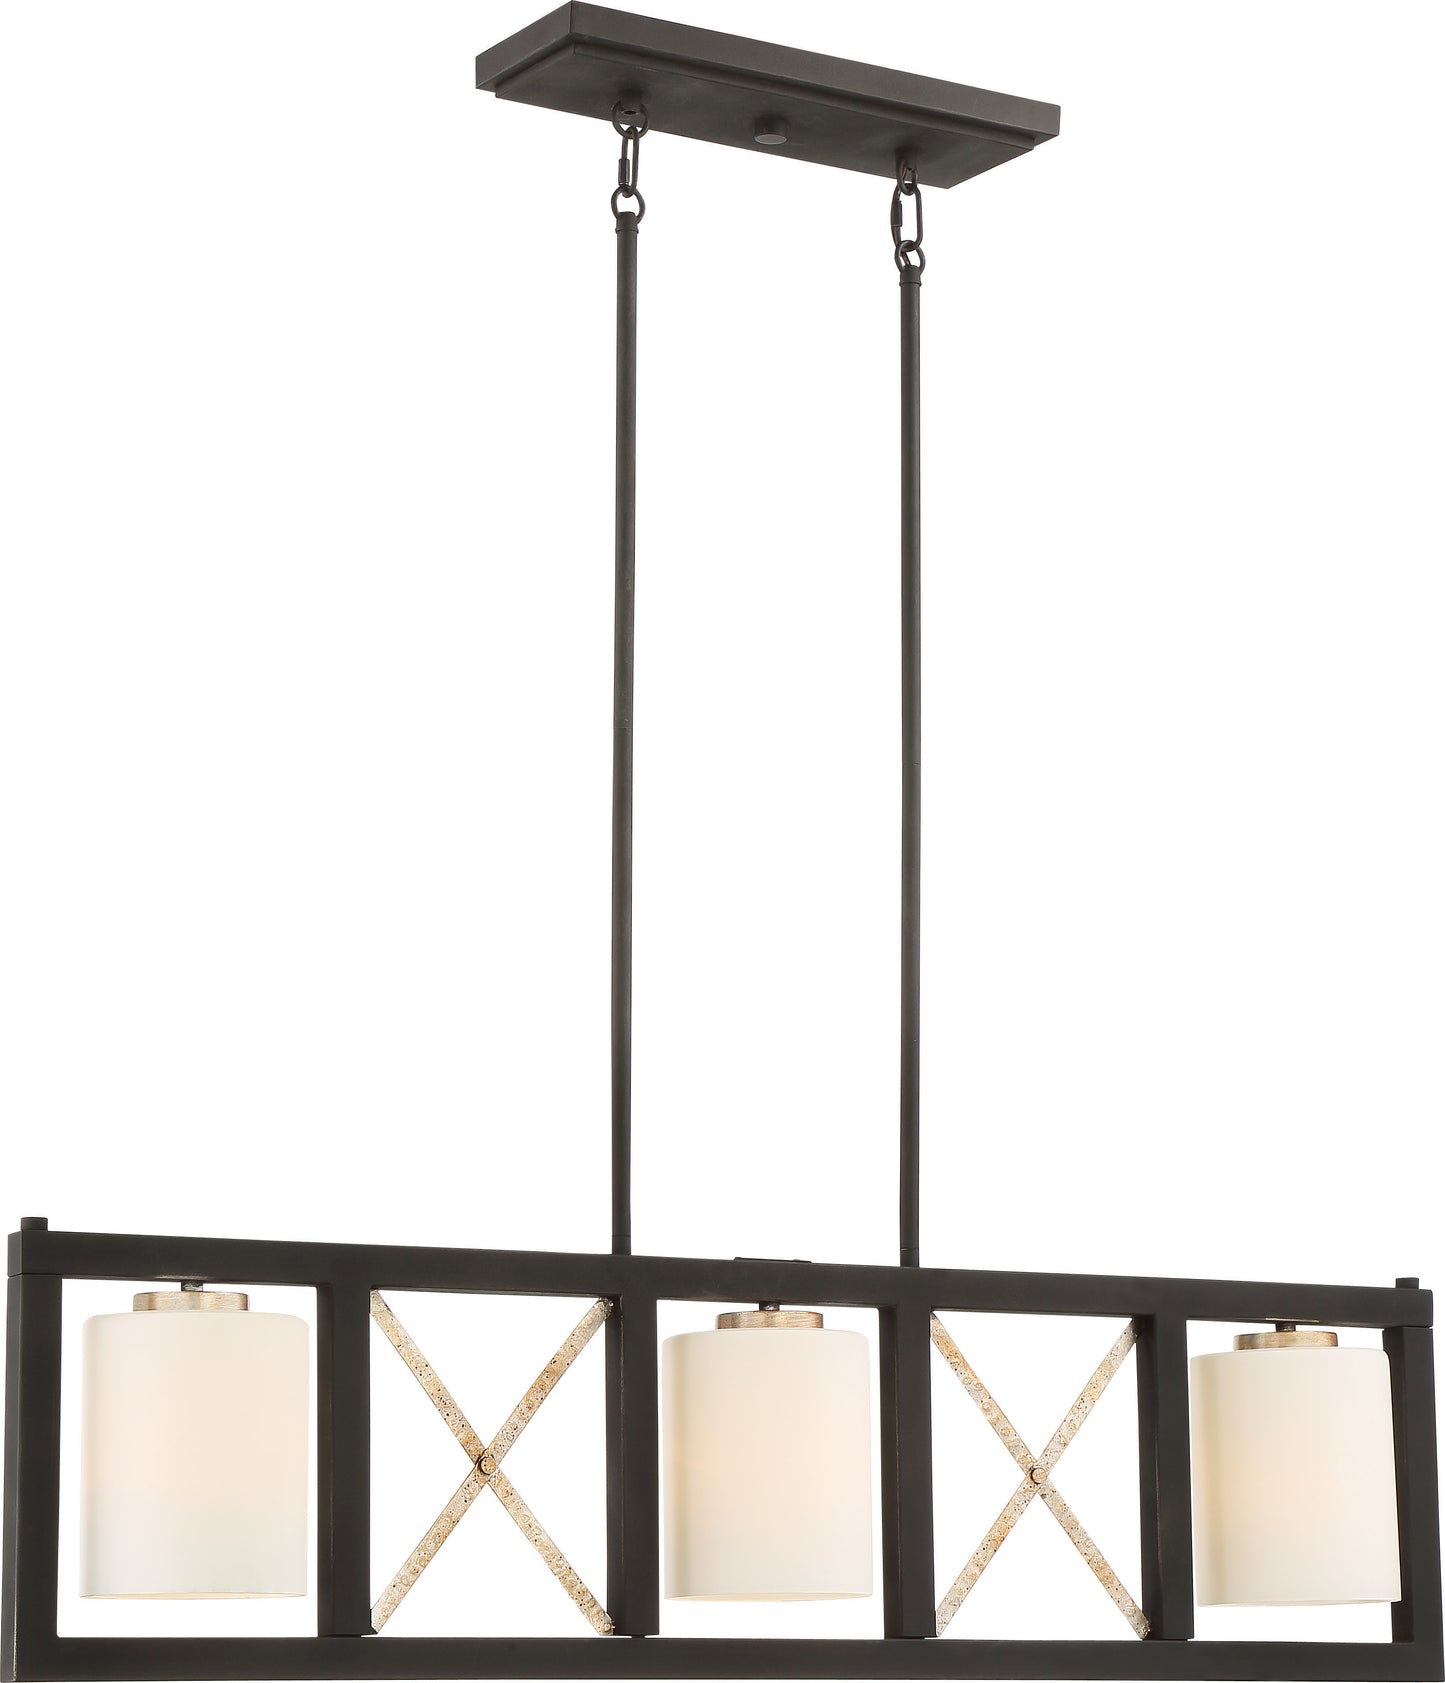 Boxer - 3 Light Island Pendant with Satin White Glass - Matte Black Finish with Antique Silver Accents